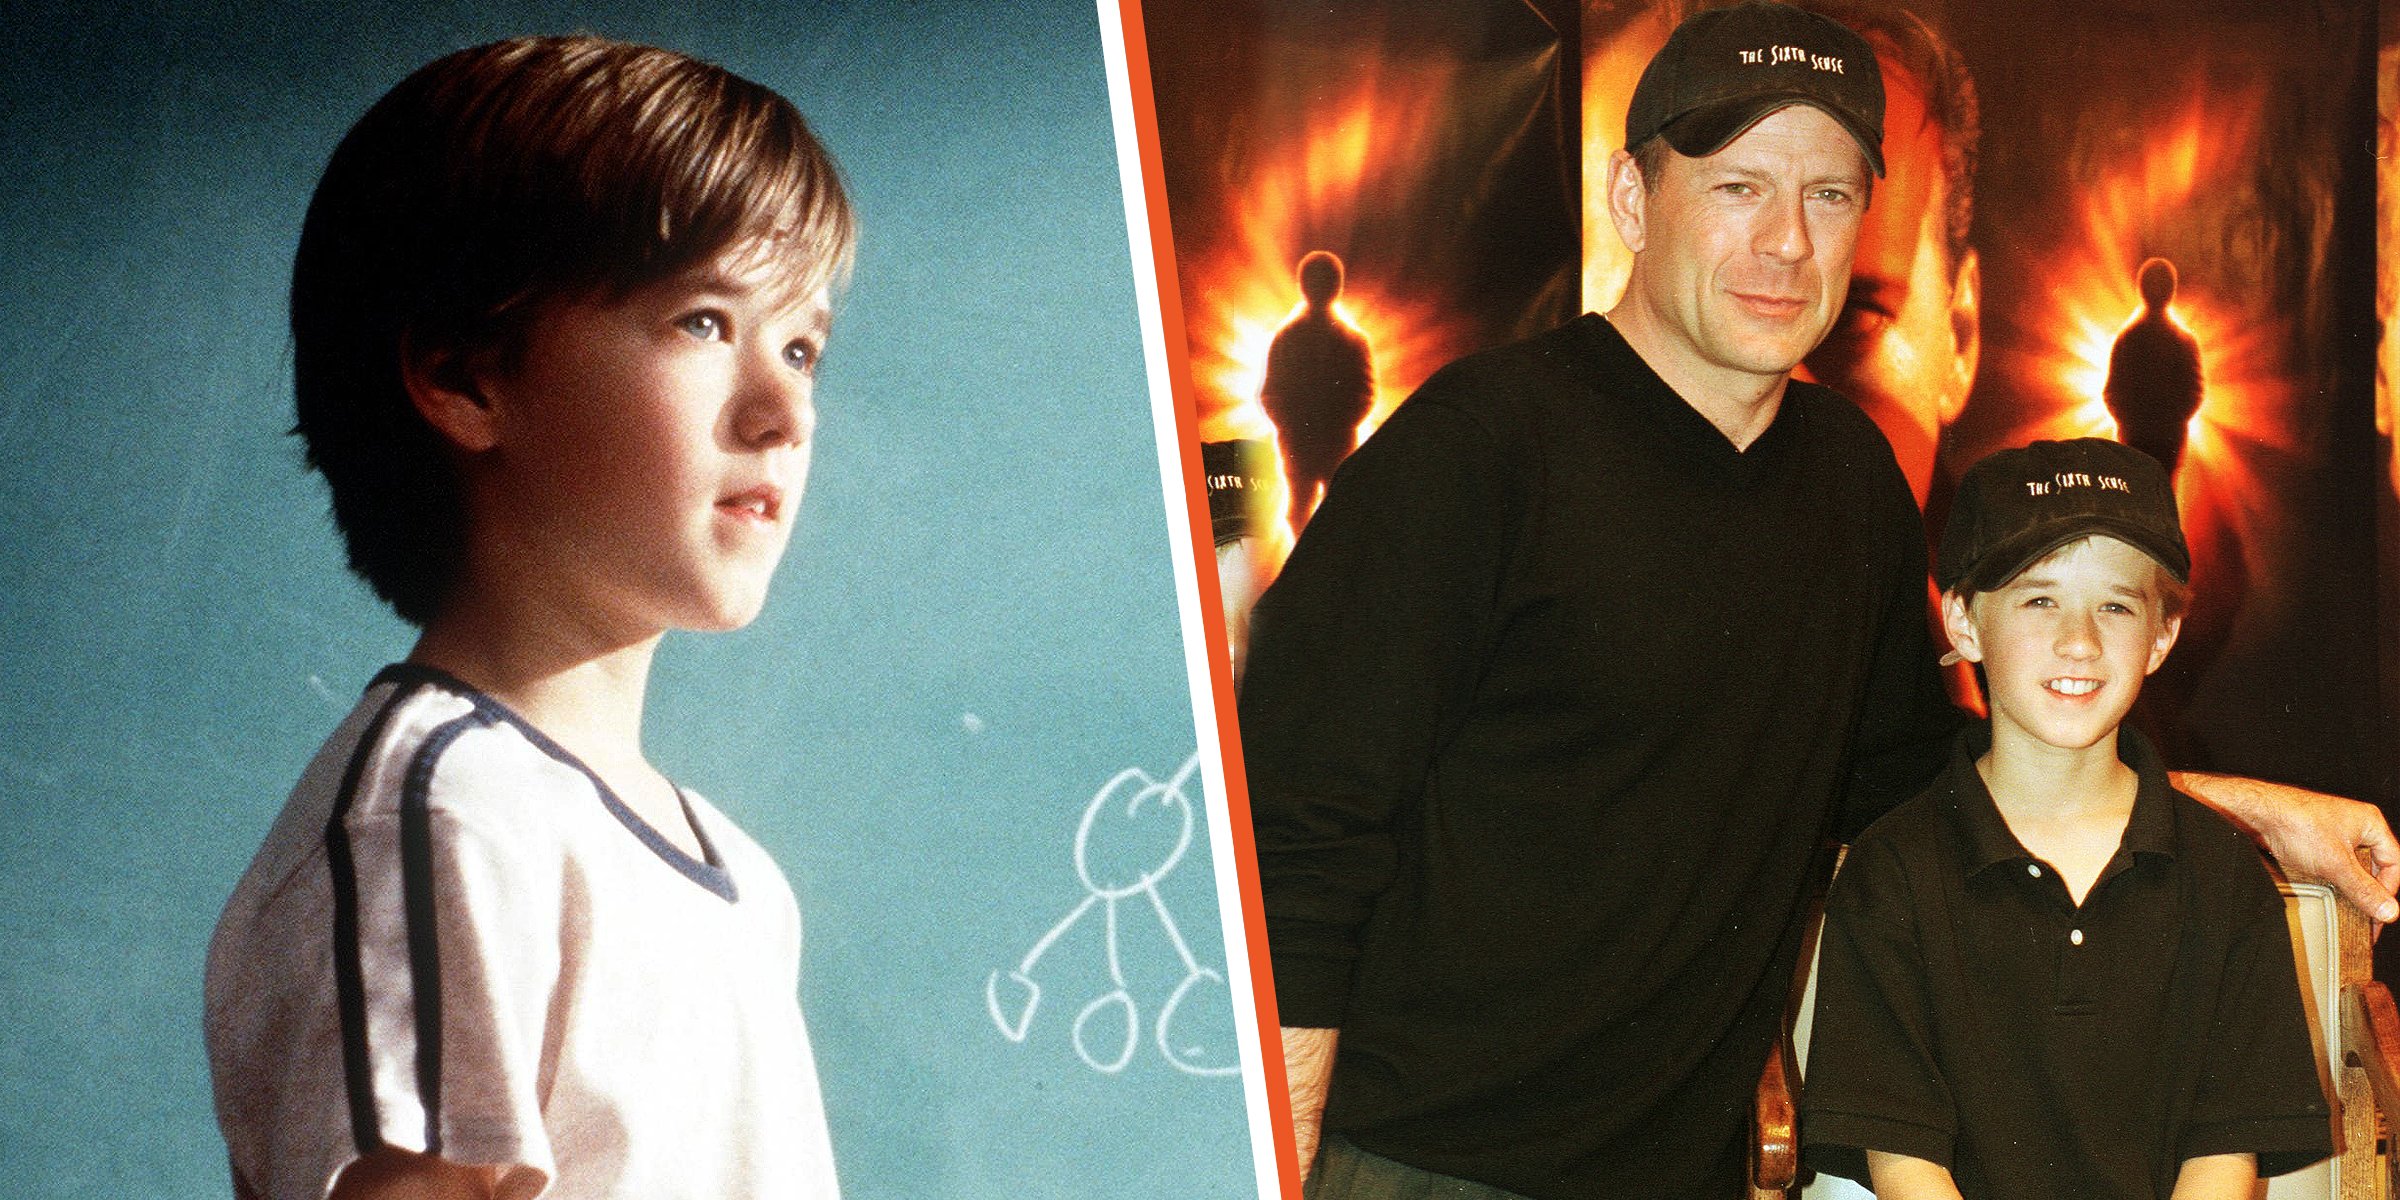 What Ever Happened to Haley Joel Osment, Kid From 'The Sixth Sense